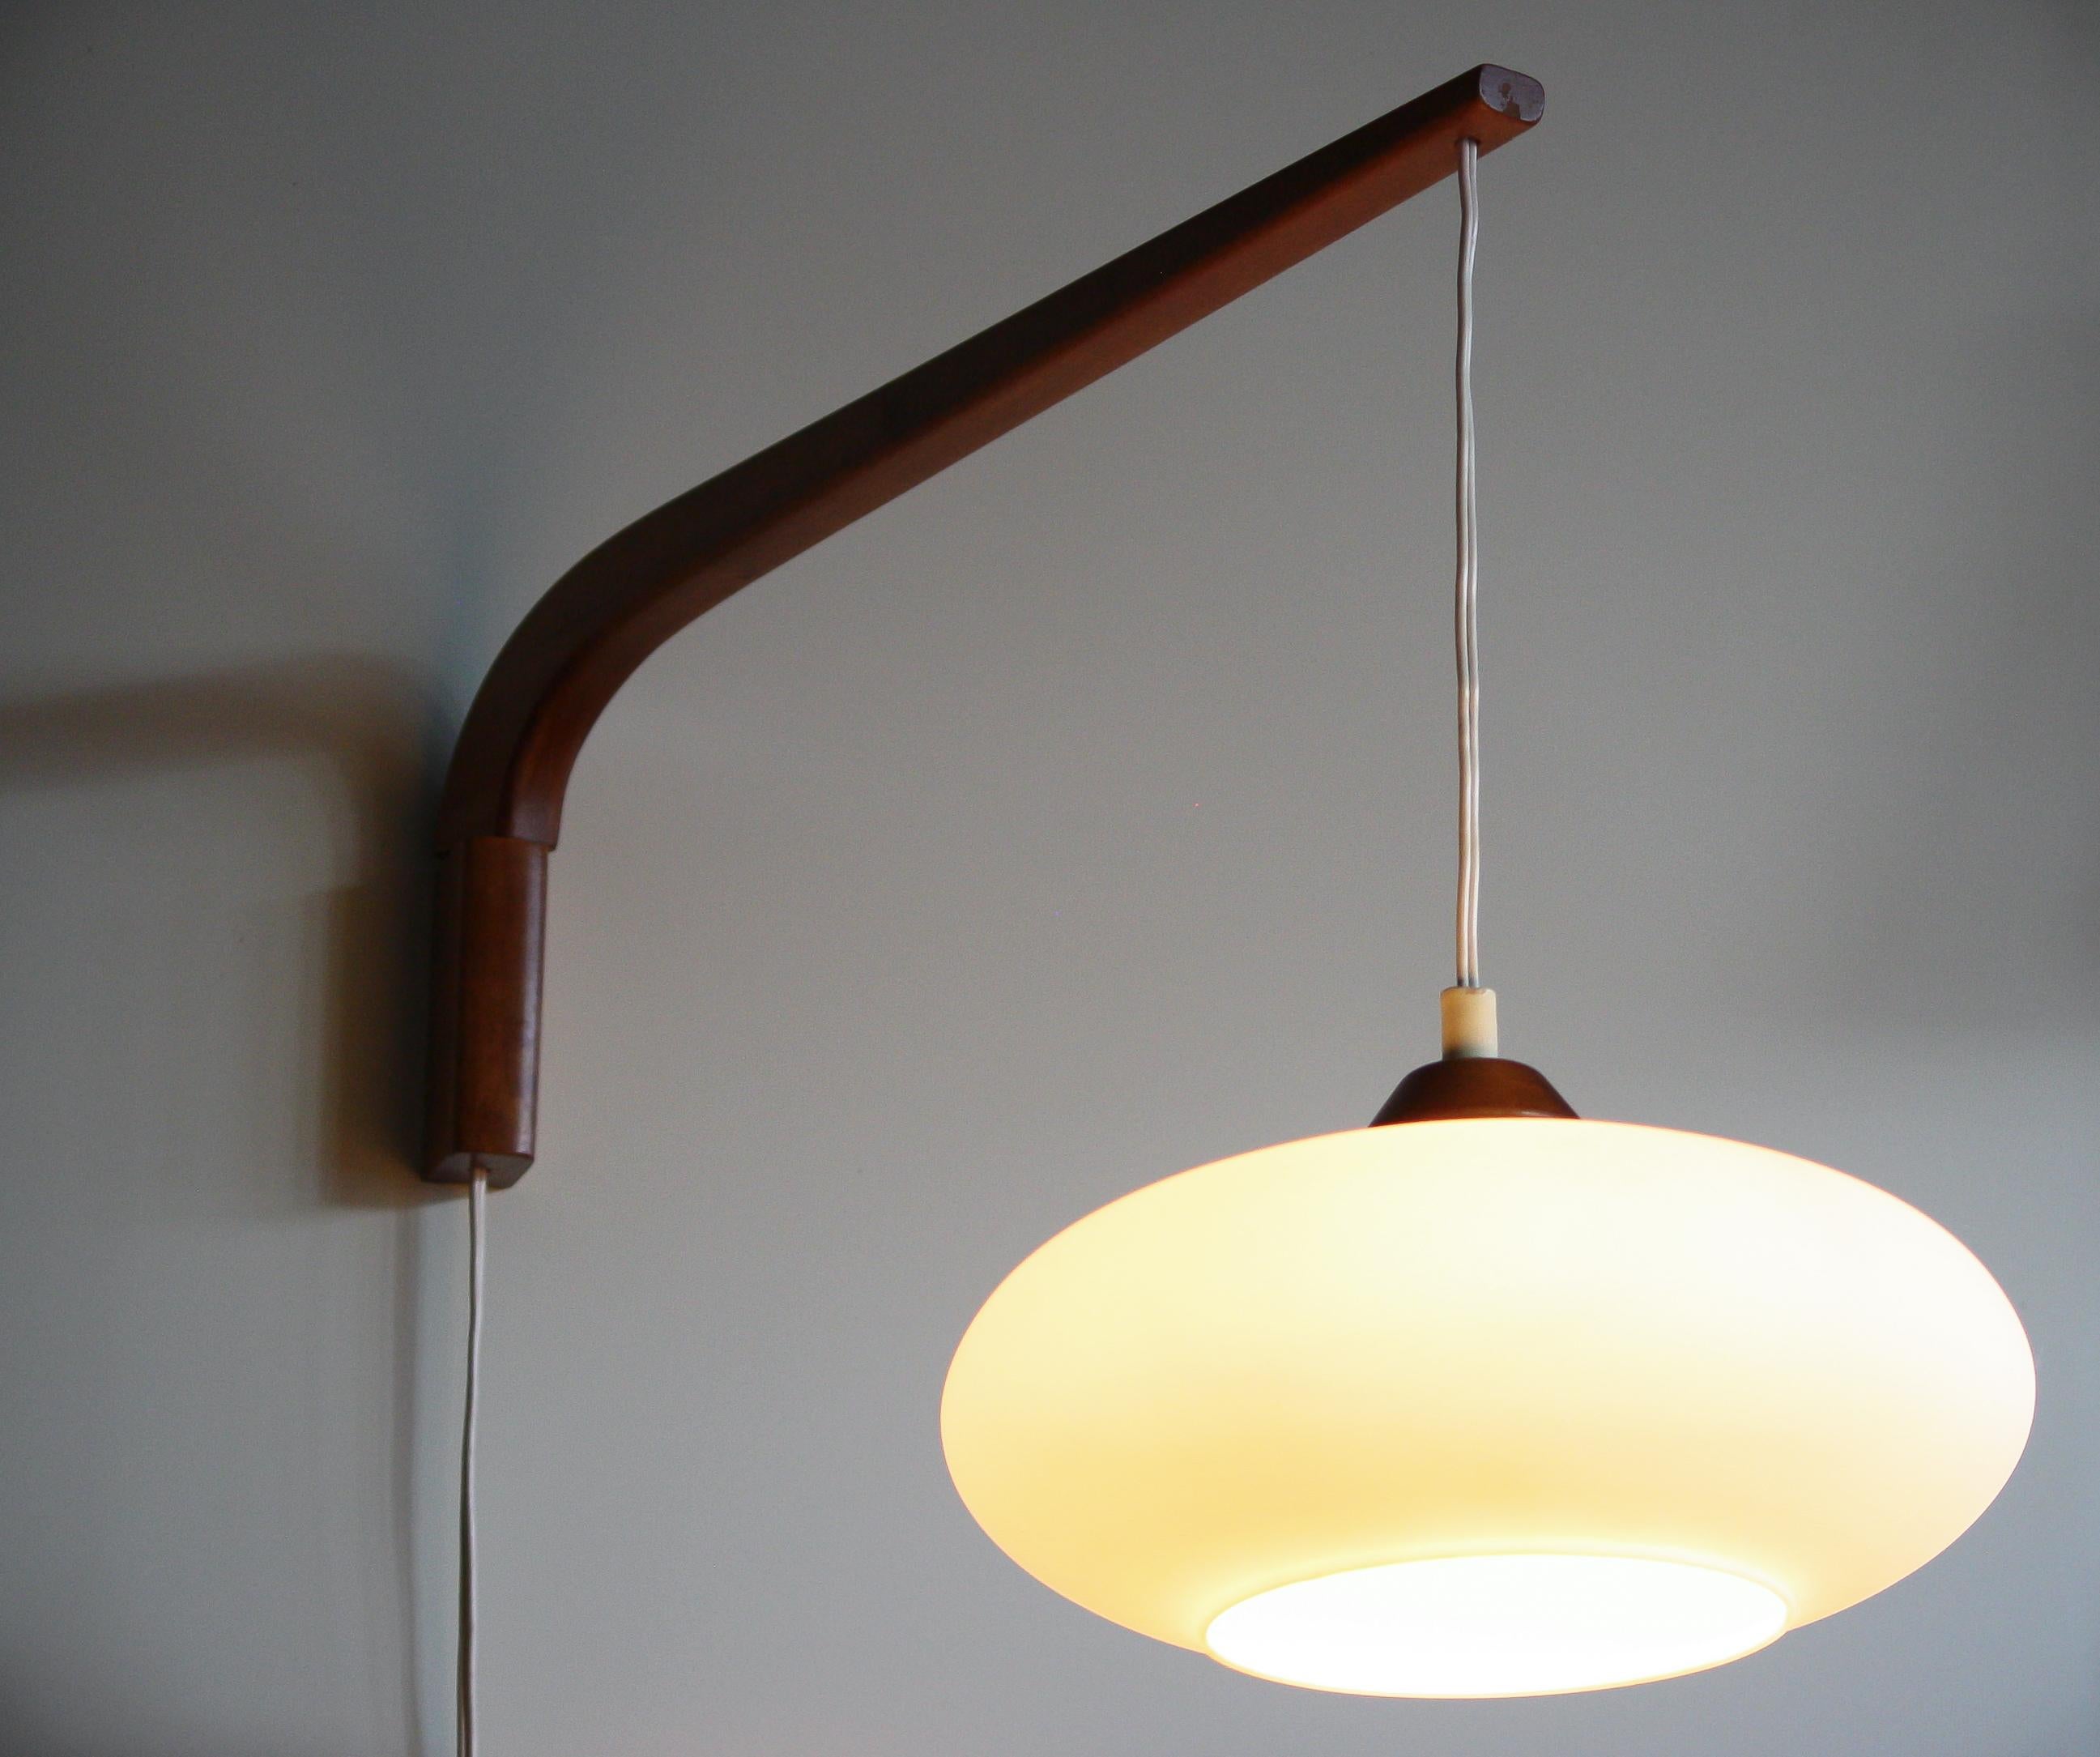 Beautiful wall pendant designed by Uno & Östen Kristiansson for Luxus Sweden.
It is made of teak with opaline glass.
The lamp is in a wonderful condition.
Period 1950s
Dimensions: H 44 cm, ø.28 cm